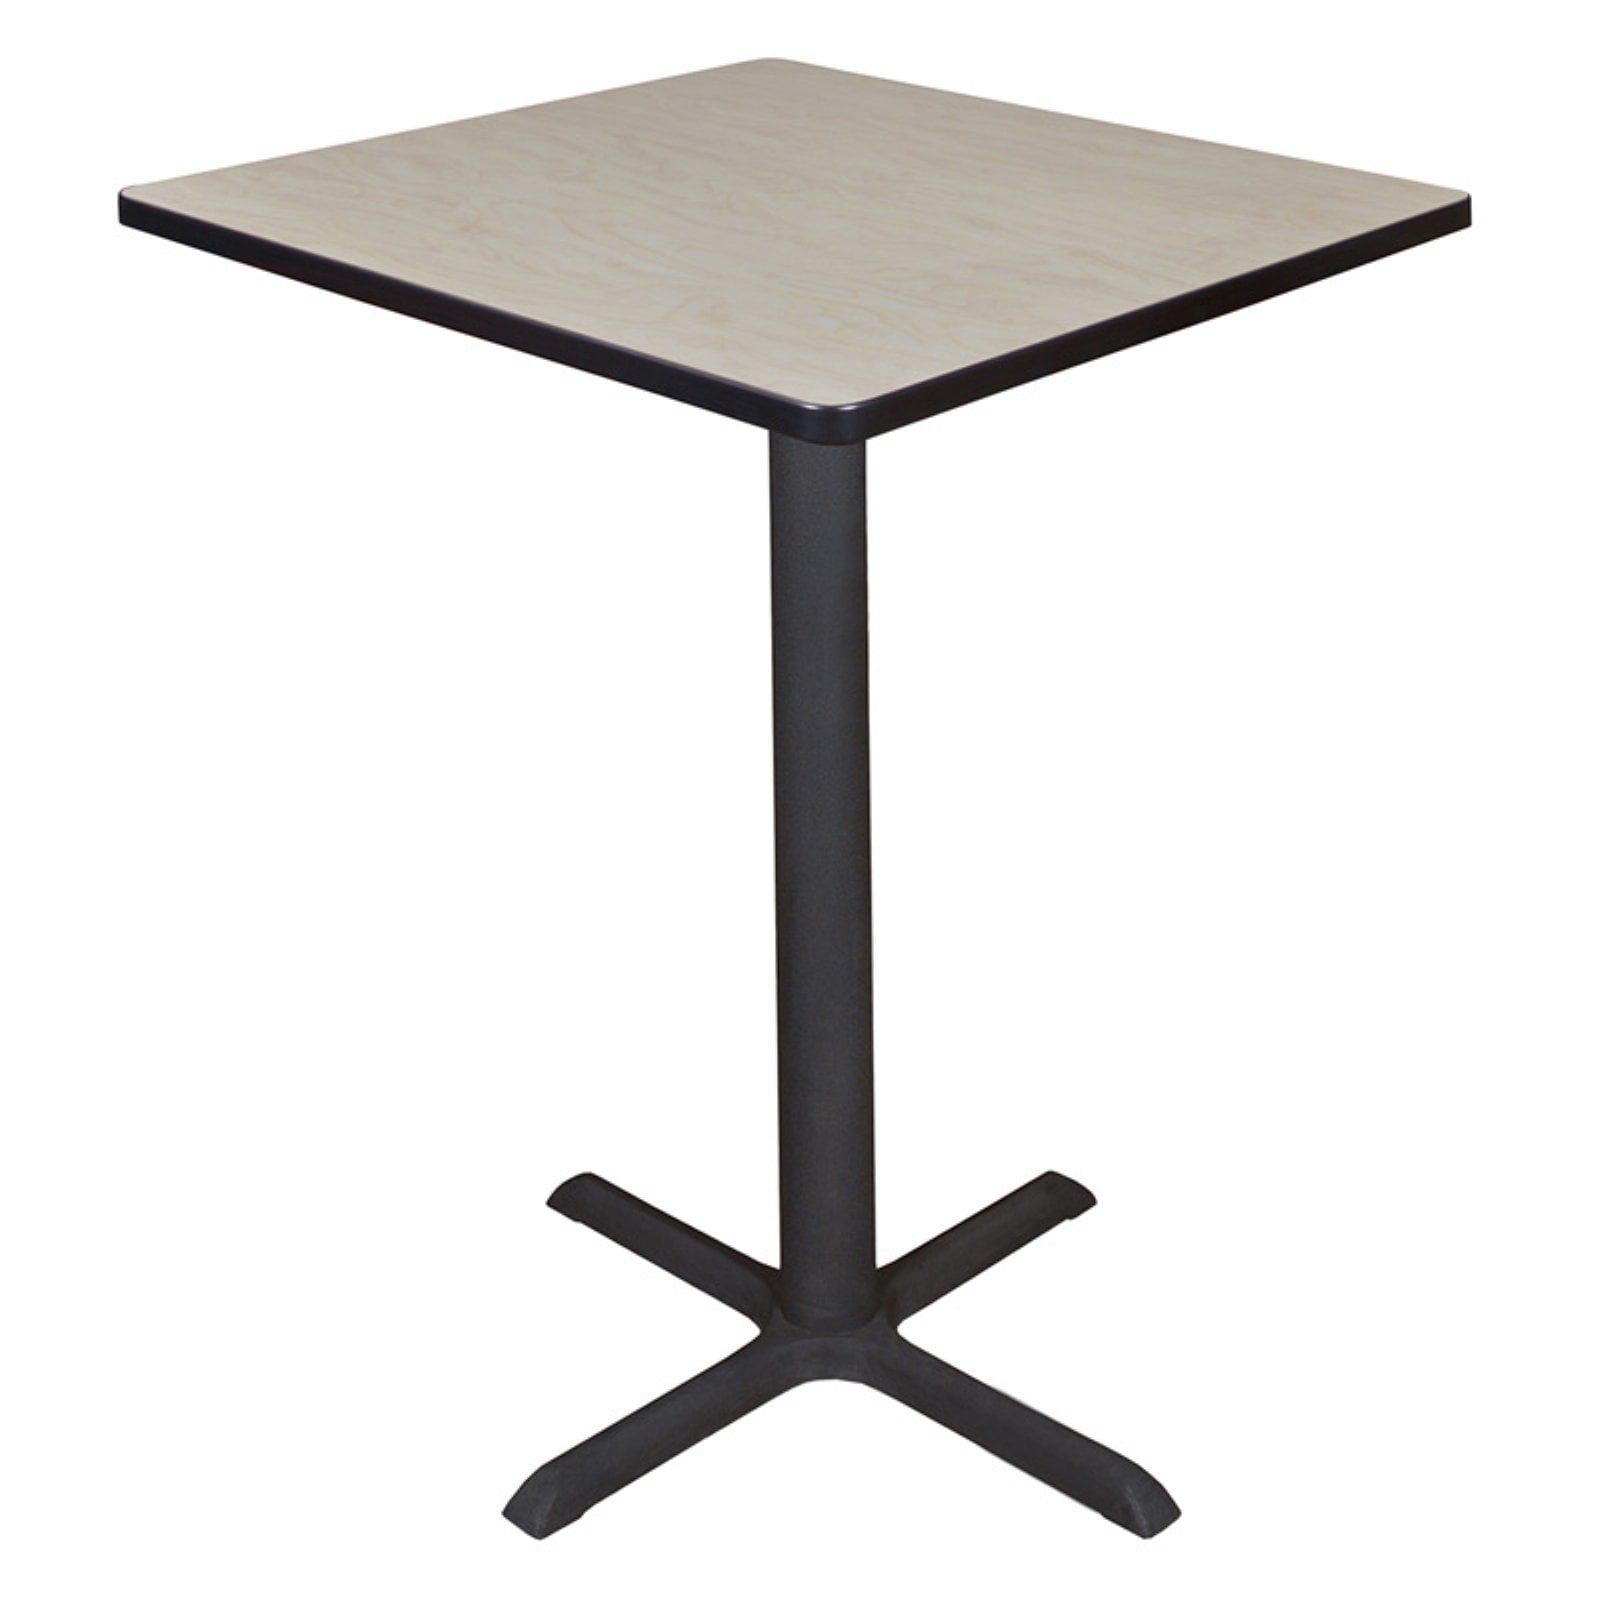 Regency Cain Square Cafe Table – Walmart Pertaining To Regency Cain Steel Coffee Tables (Gallery 1 of 21)